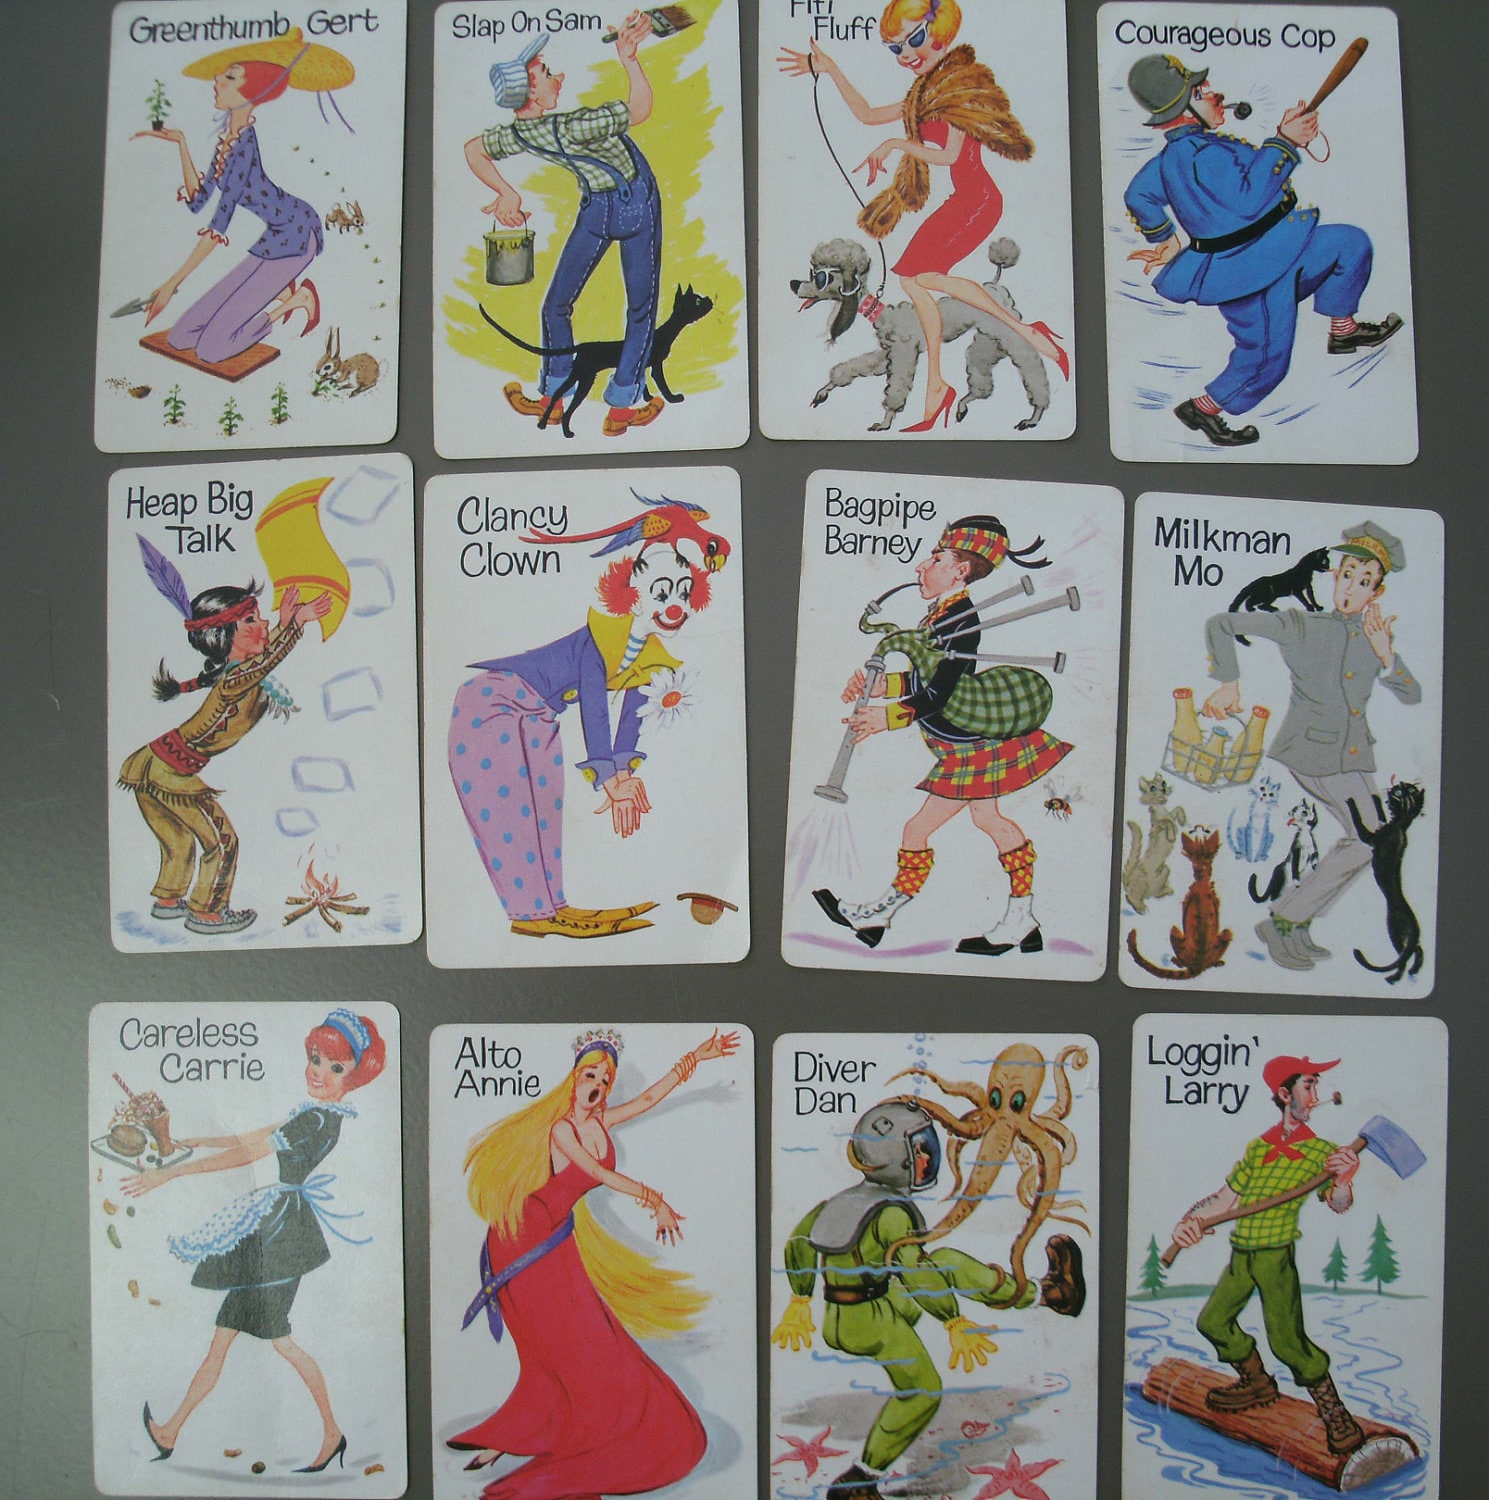 patch products inc old maid cards old